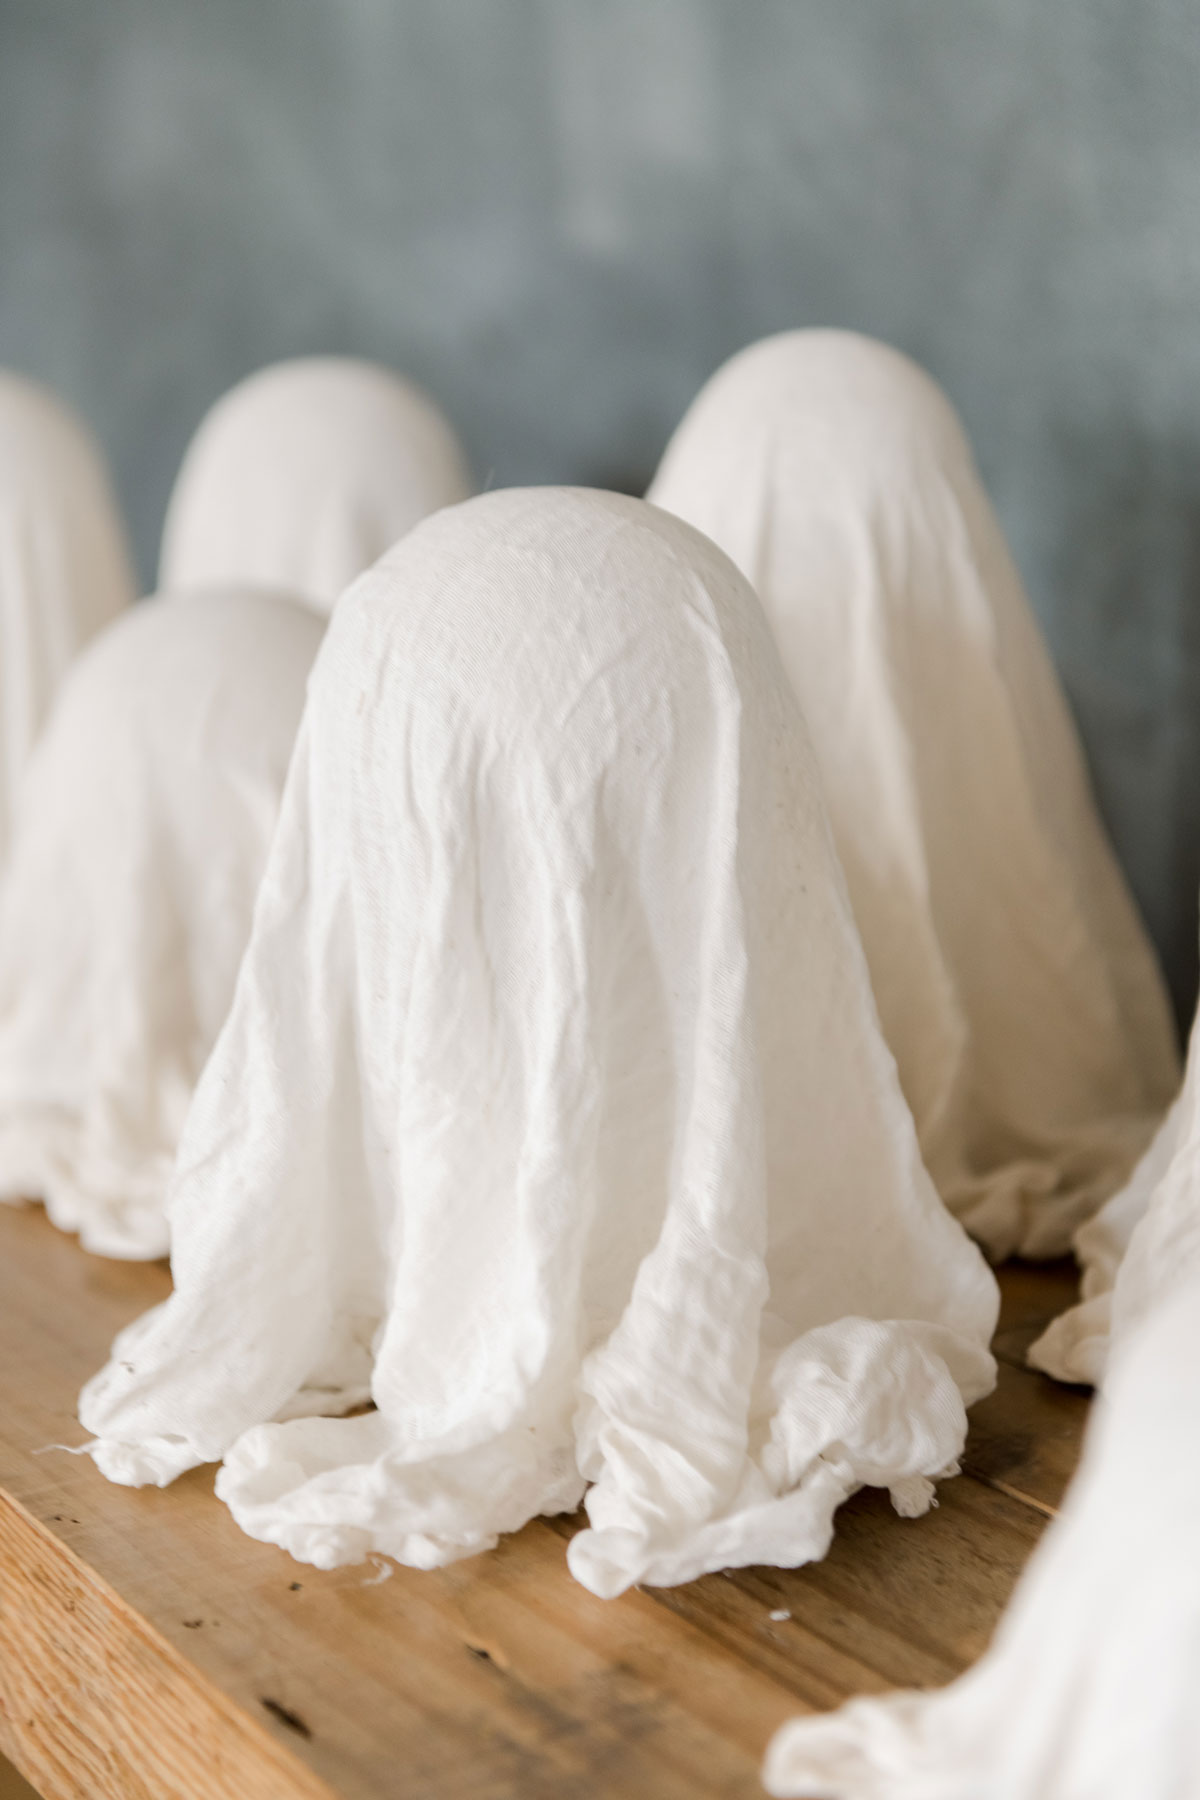 How to make cheesecloth ghosts!